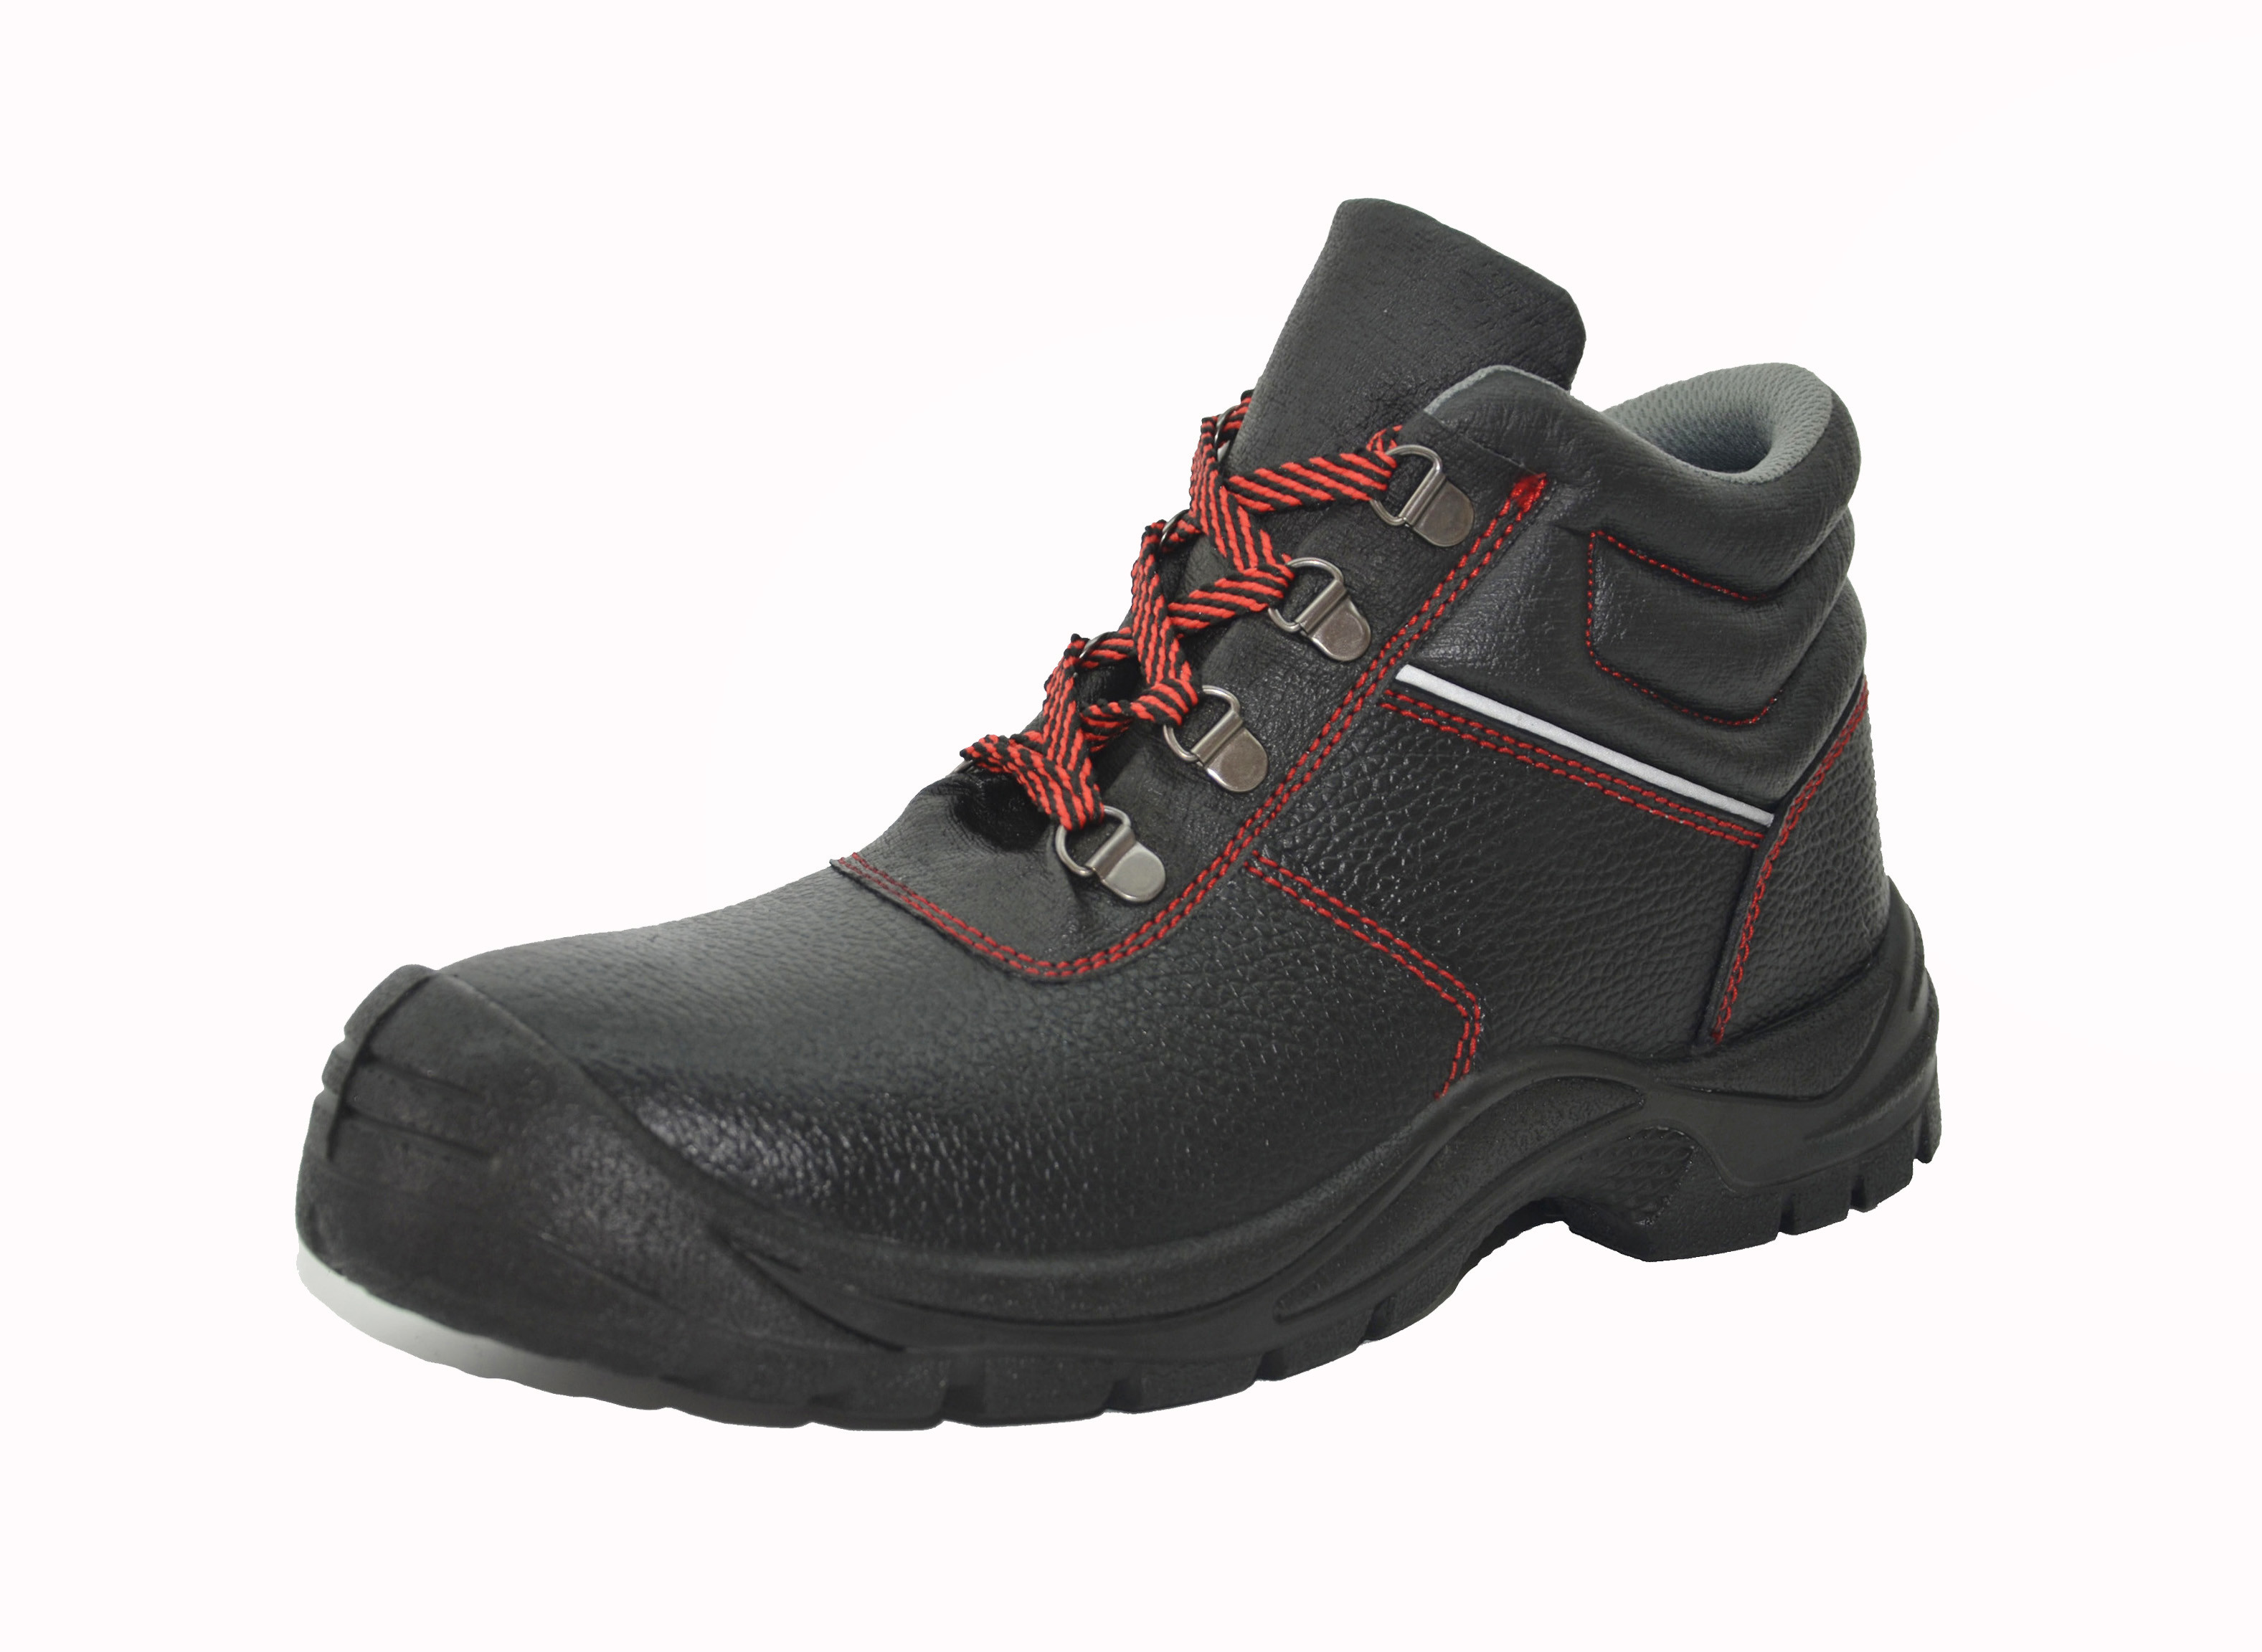 Impact - Proof Genuine Leather Work Shoes PU Outsole Acid And Alkali Resistance